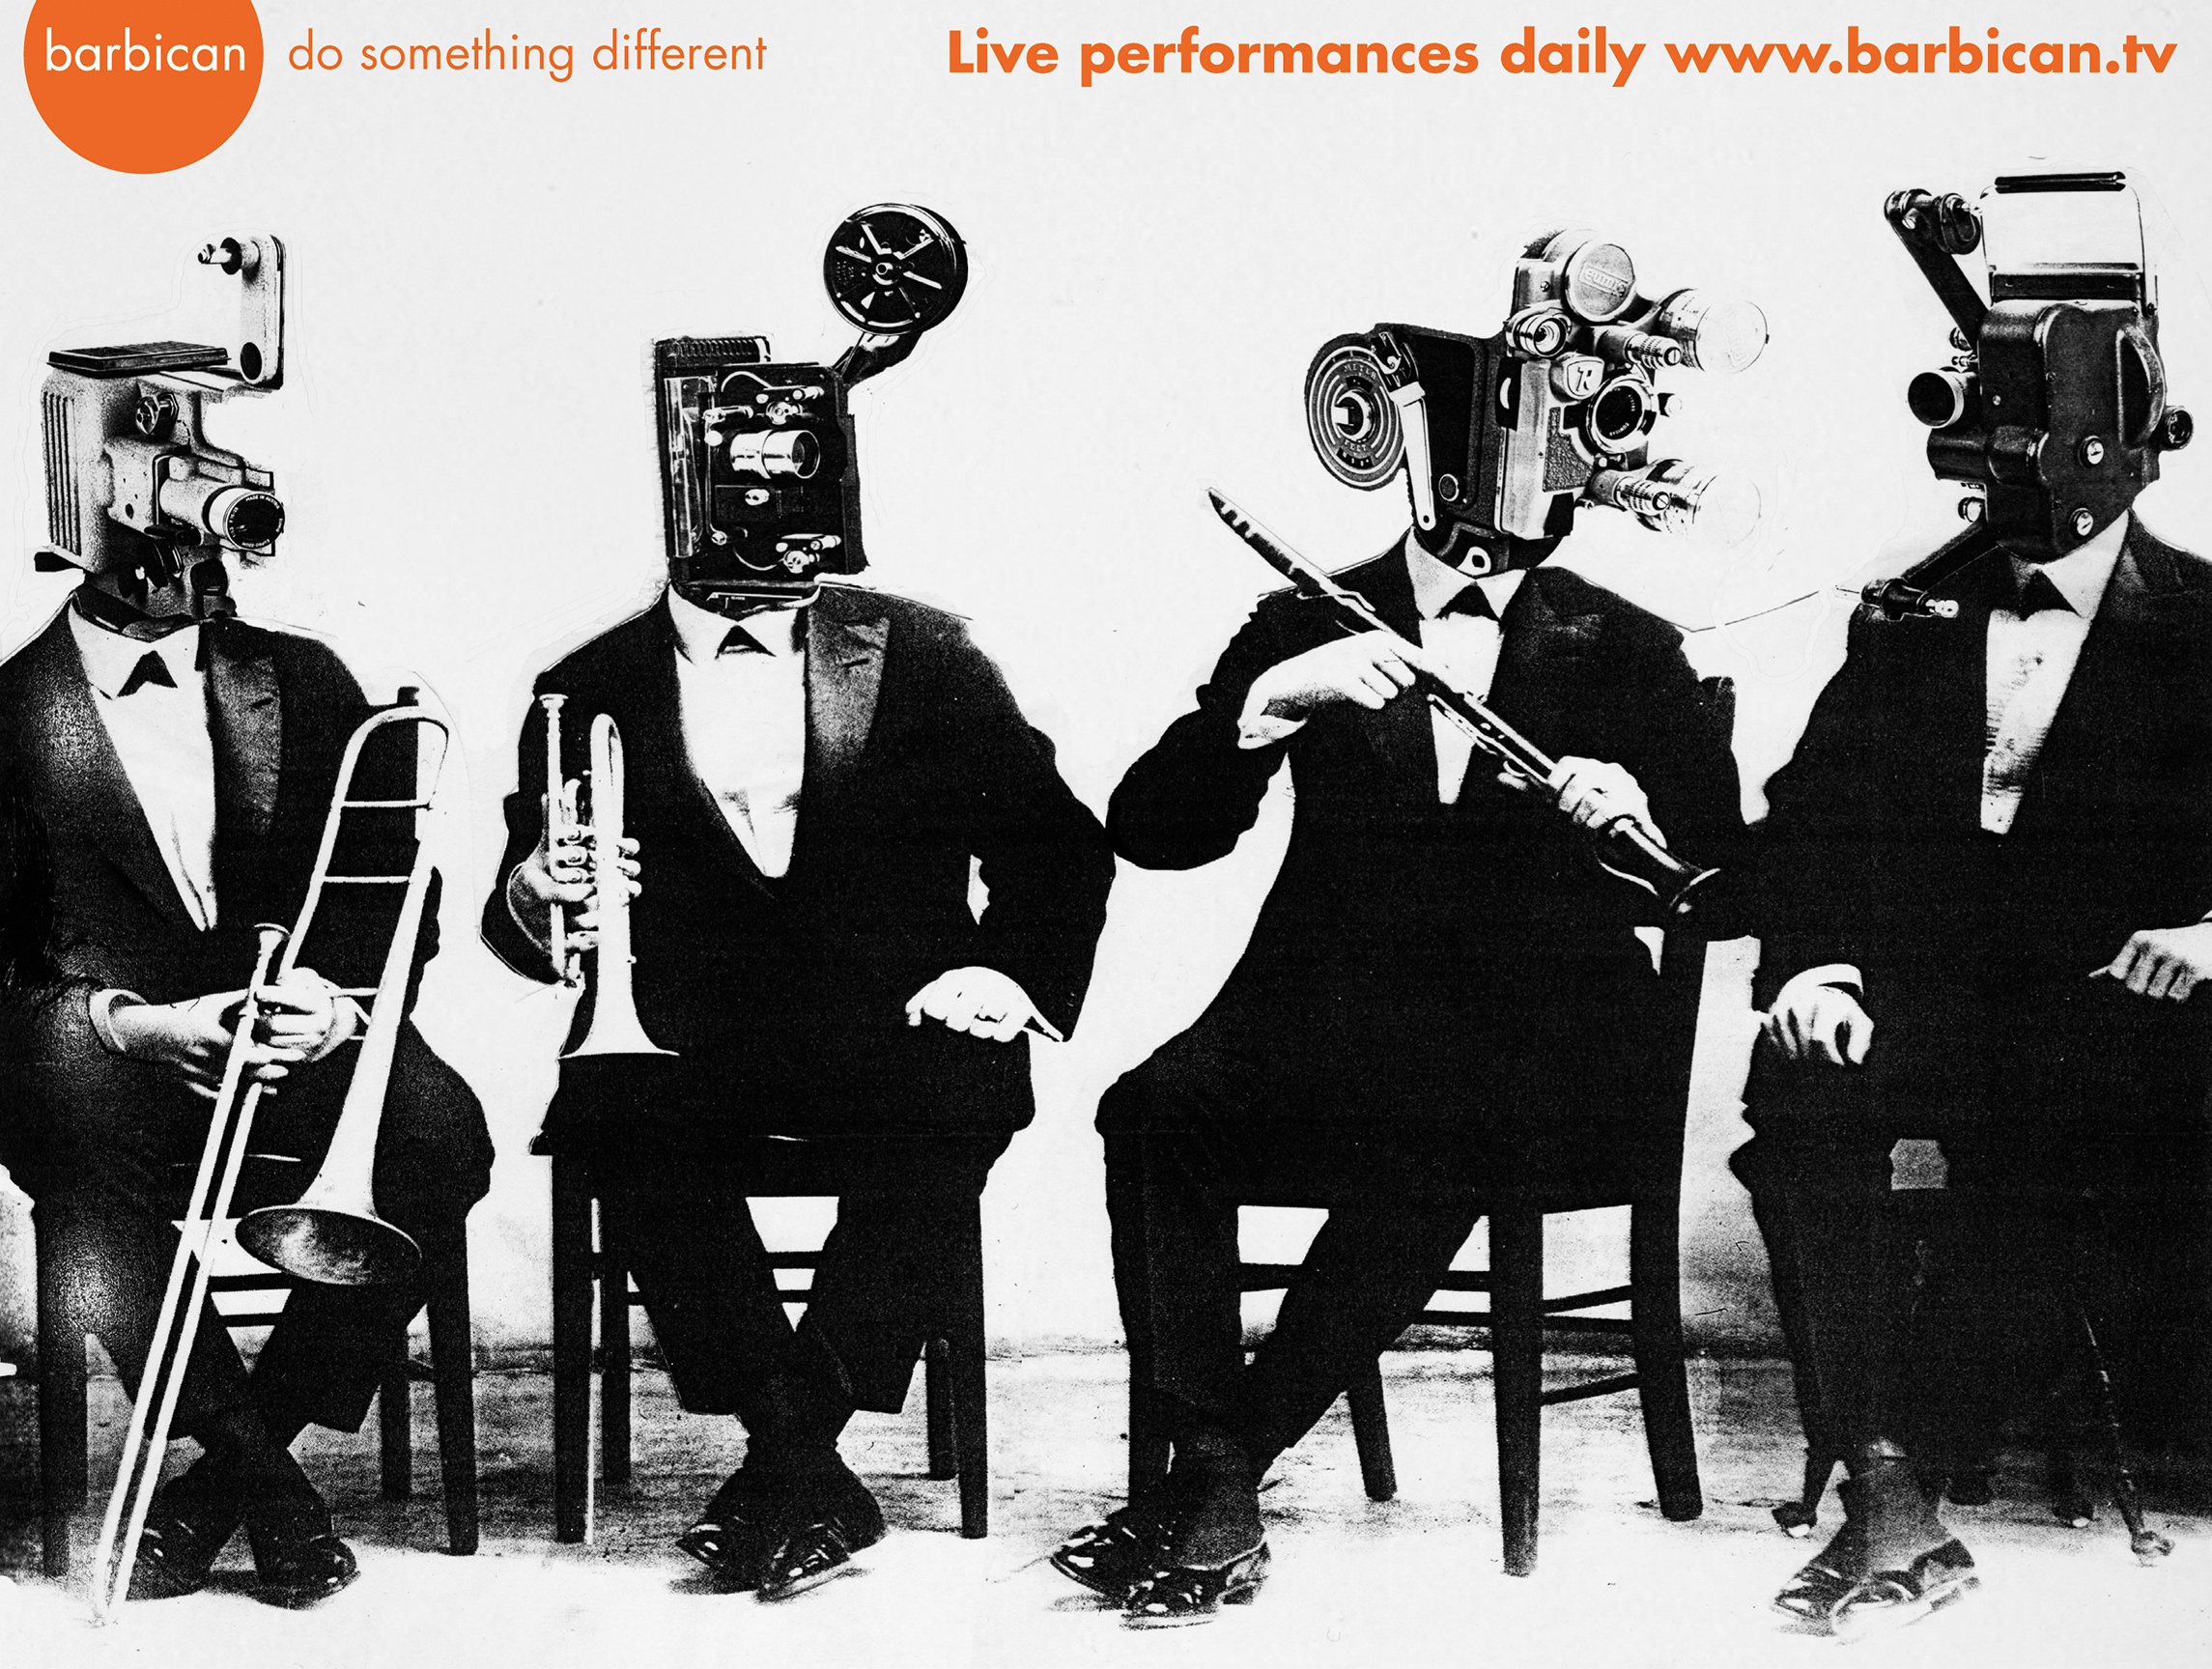 The Barbican TV - Live Performances Daily poster illustration